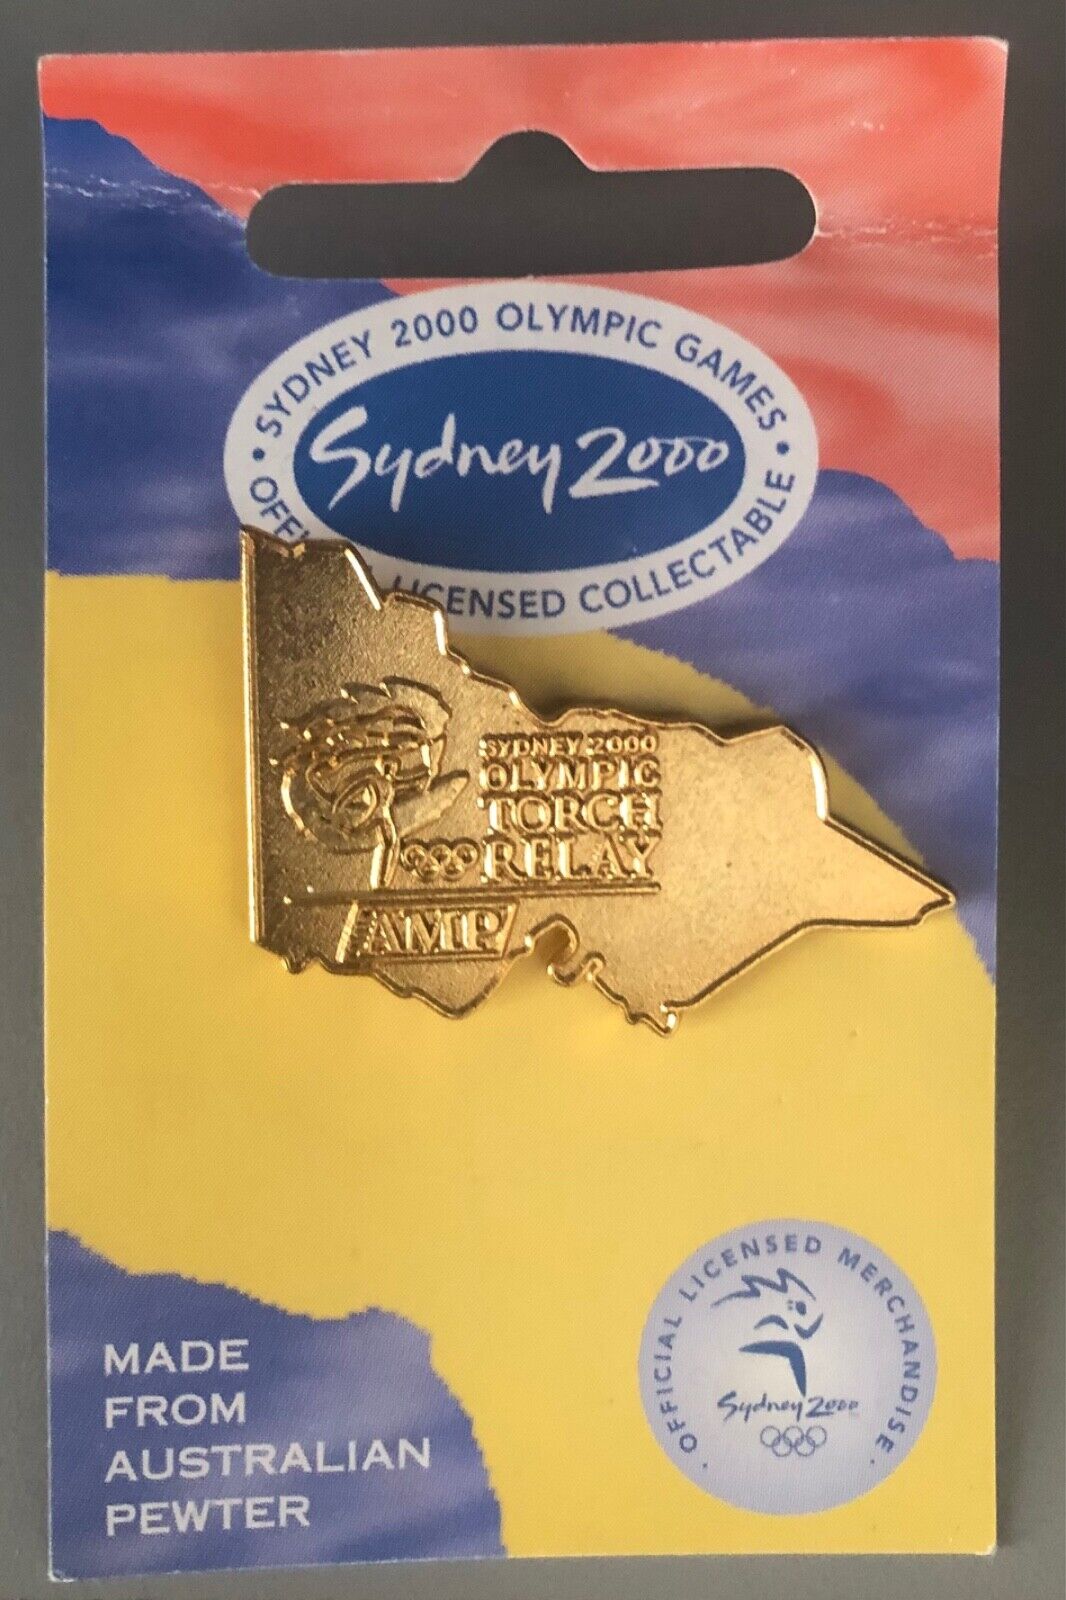 Olympic Sydney 2000 Torch Relay Pin Badge